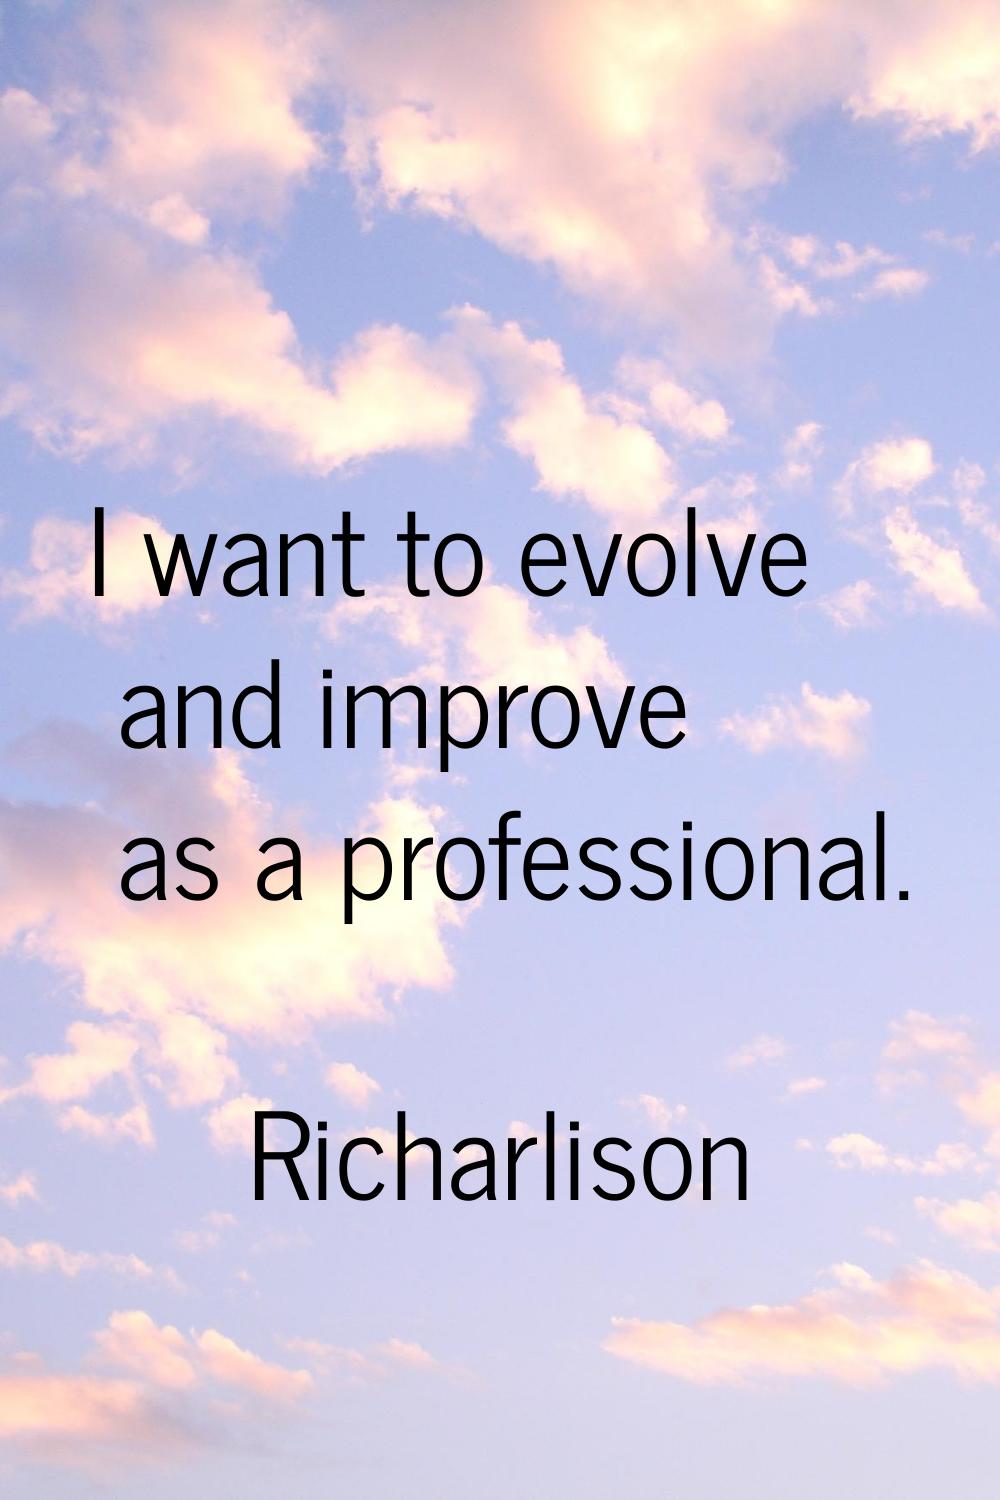 I want to evolve and improve as a professional.